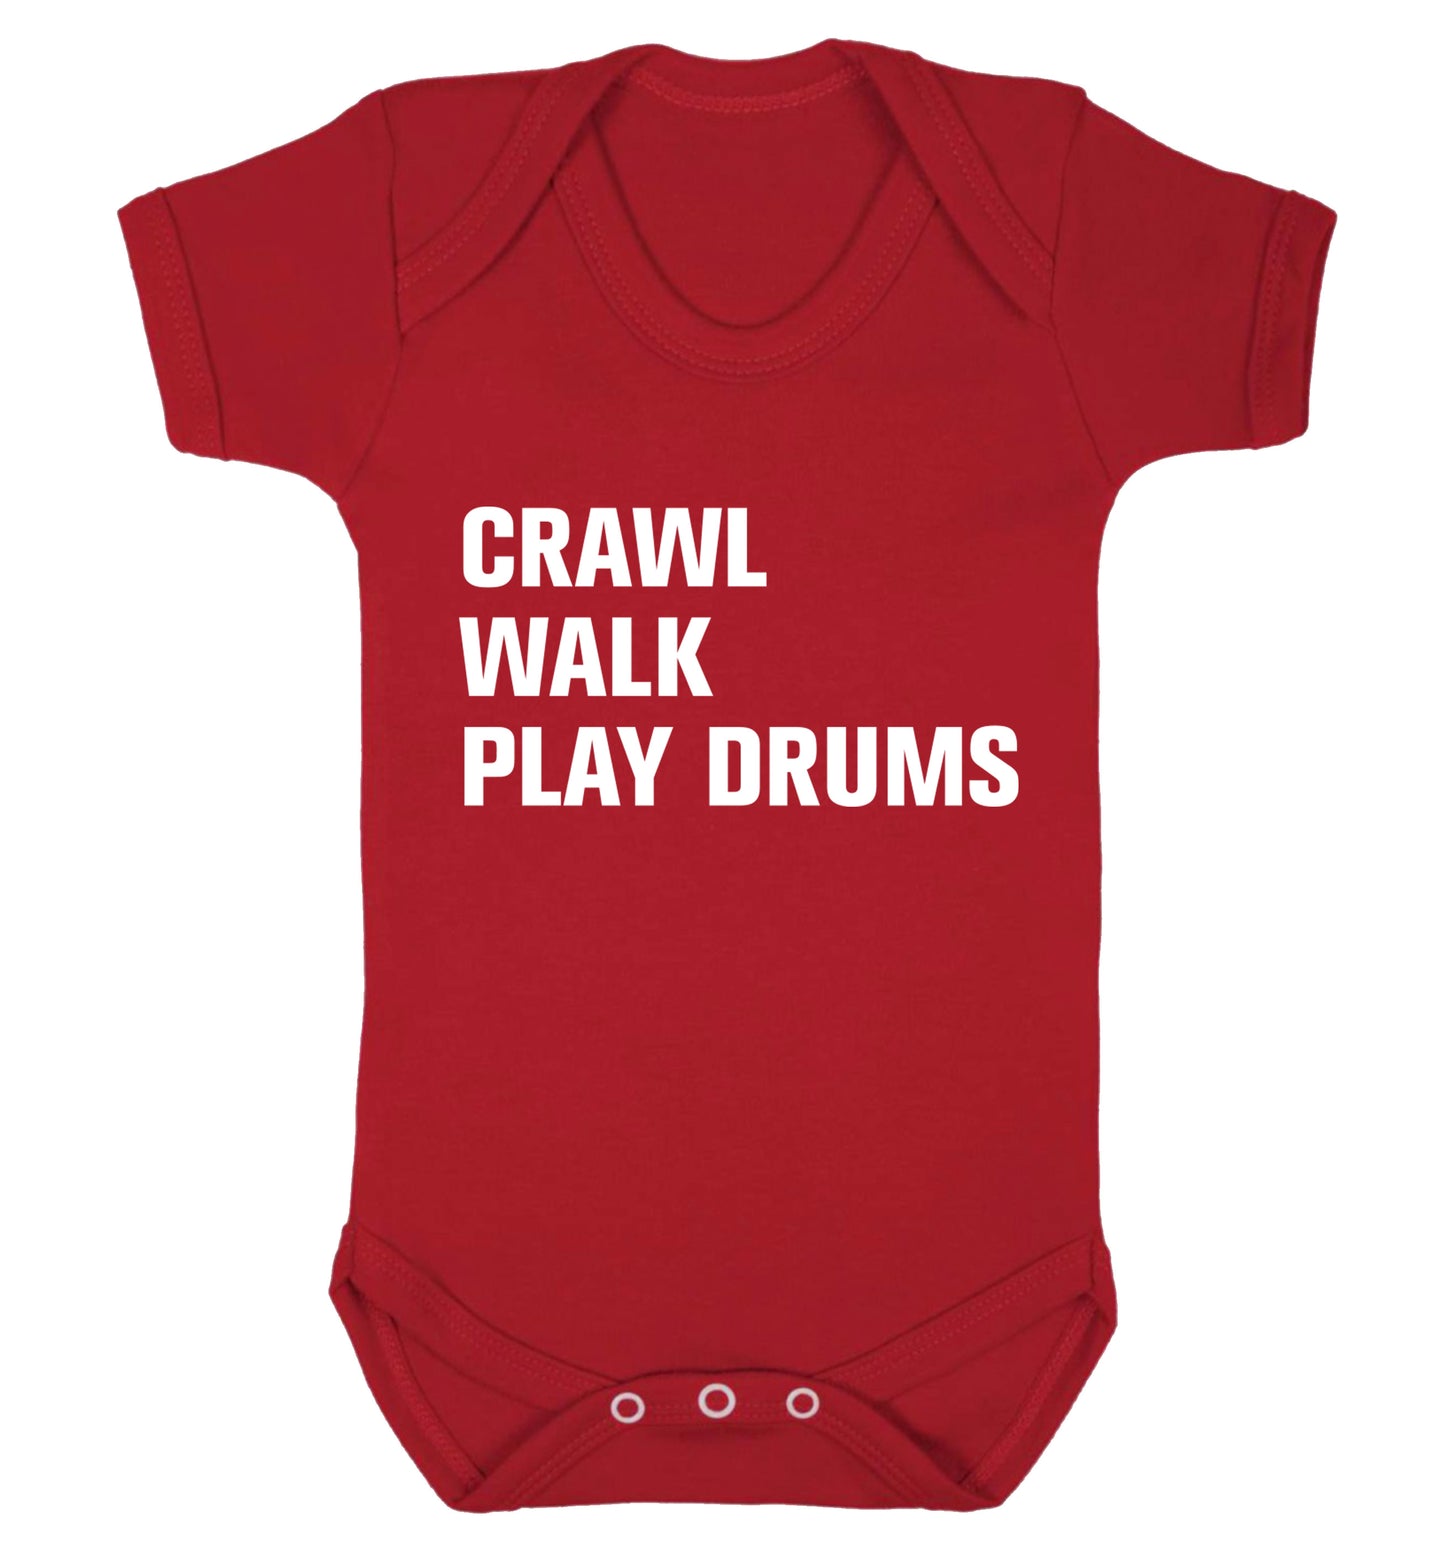 Crawl walk play drums Baby Vest red 18-24 months